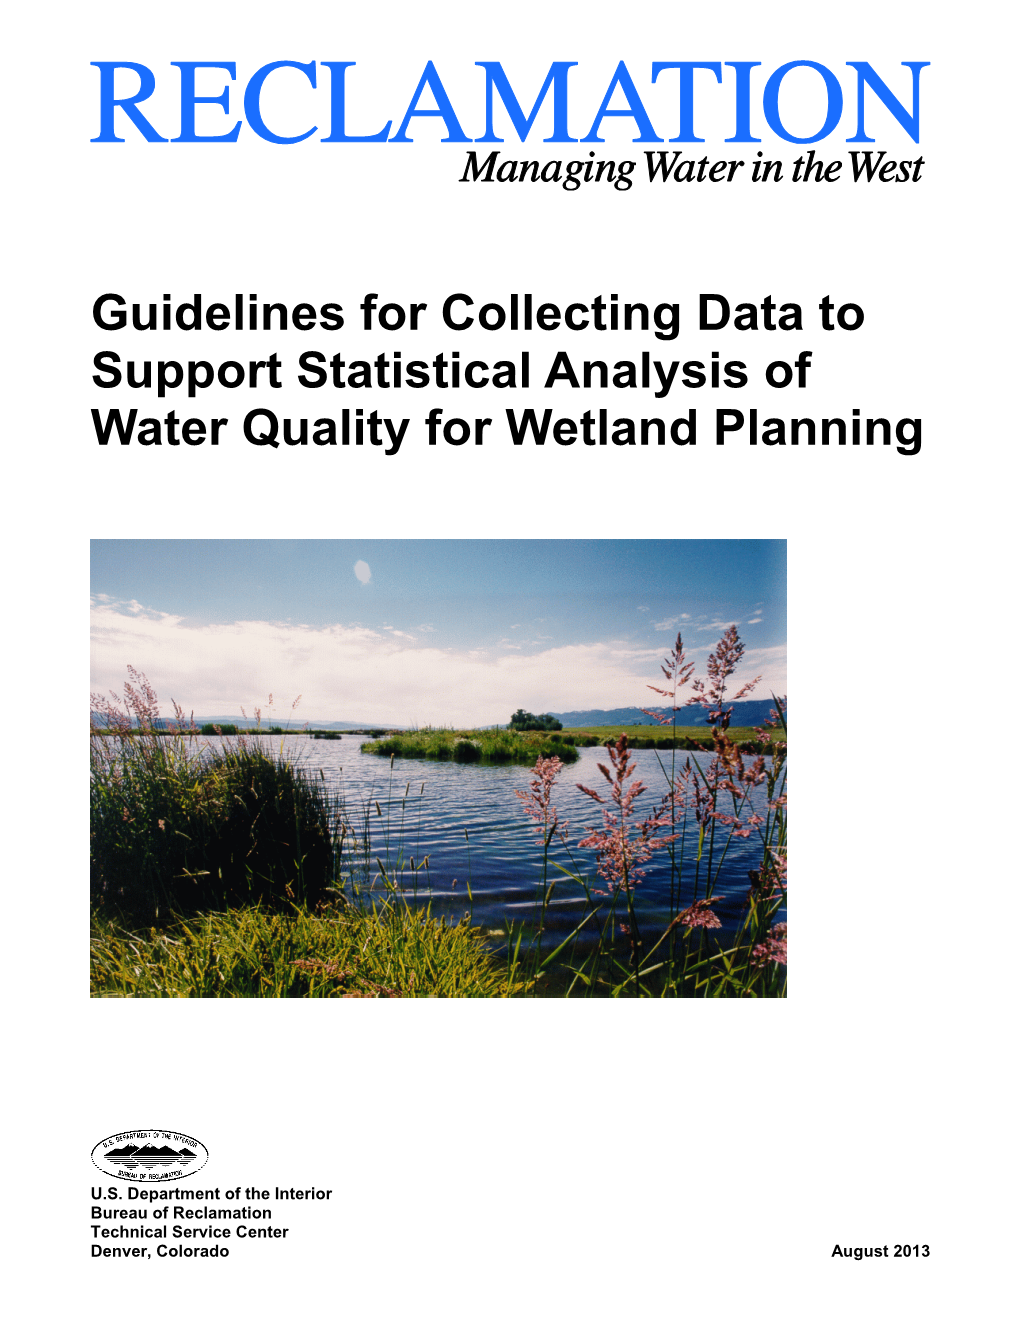 Guidelines for Collecting Data to Support Statistical Analysis of Water Quality for Wetland Planning